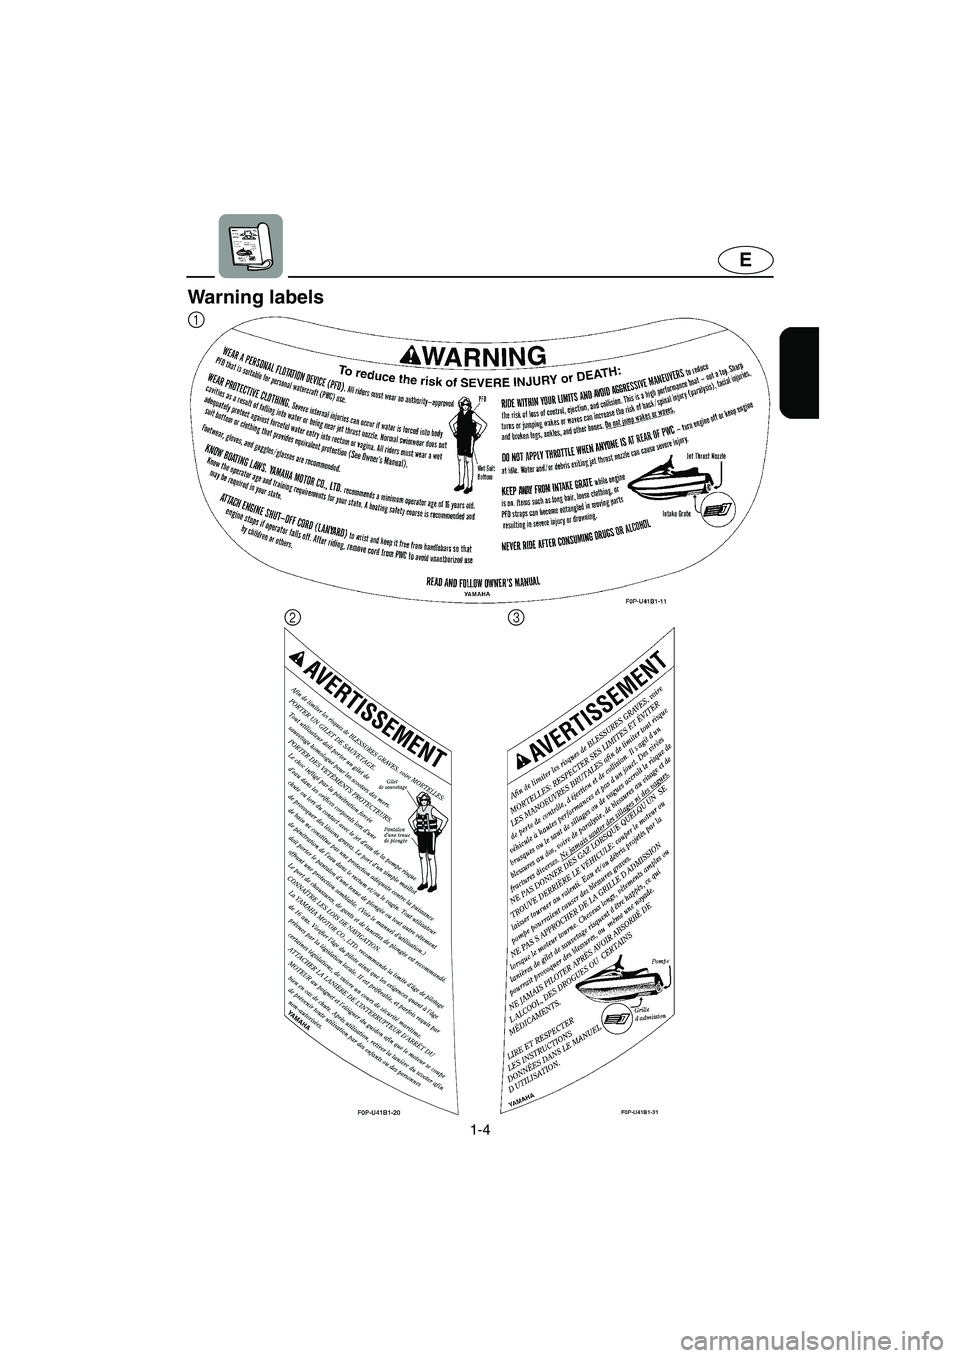 YAMAHA XL 800 2001  Owners Manual 1-4
E
Warning labels
1
23
E_F0P71-1.fm  Page 4  Tuesday, July 18, 2000  7:10 PM 